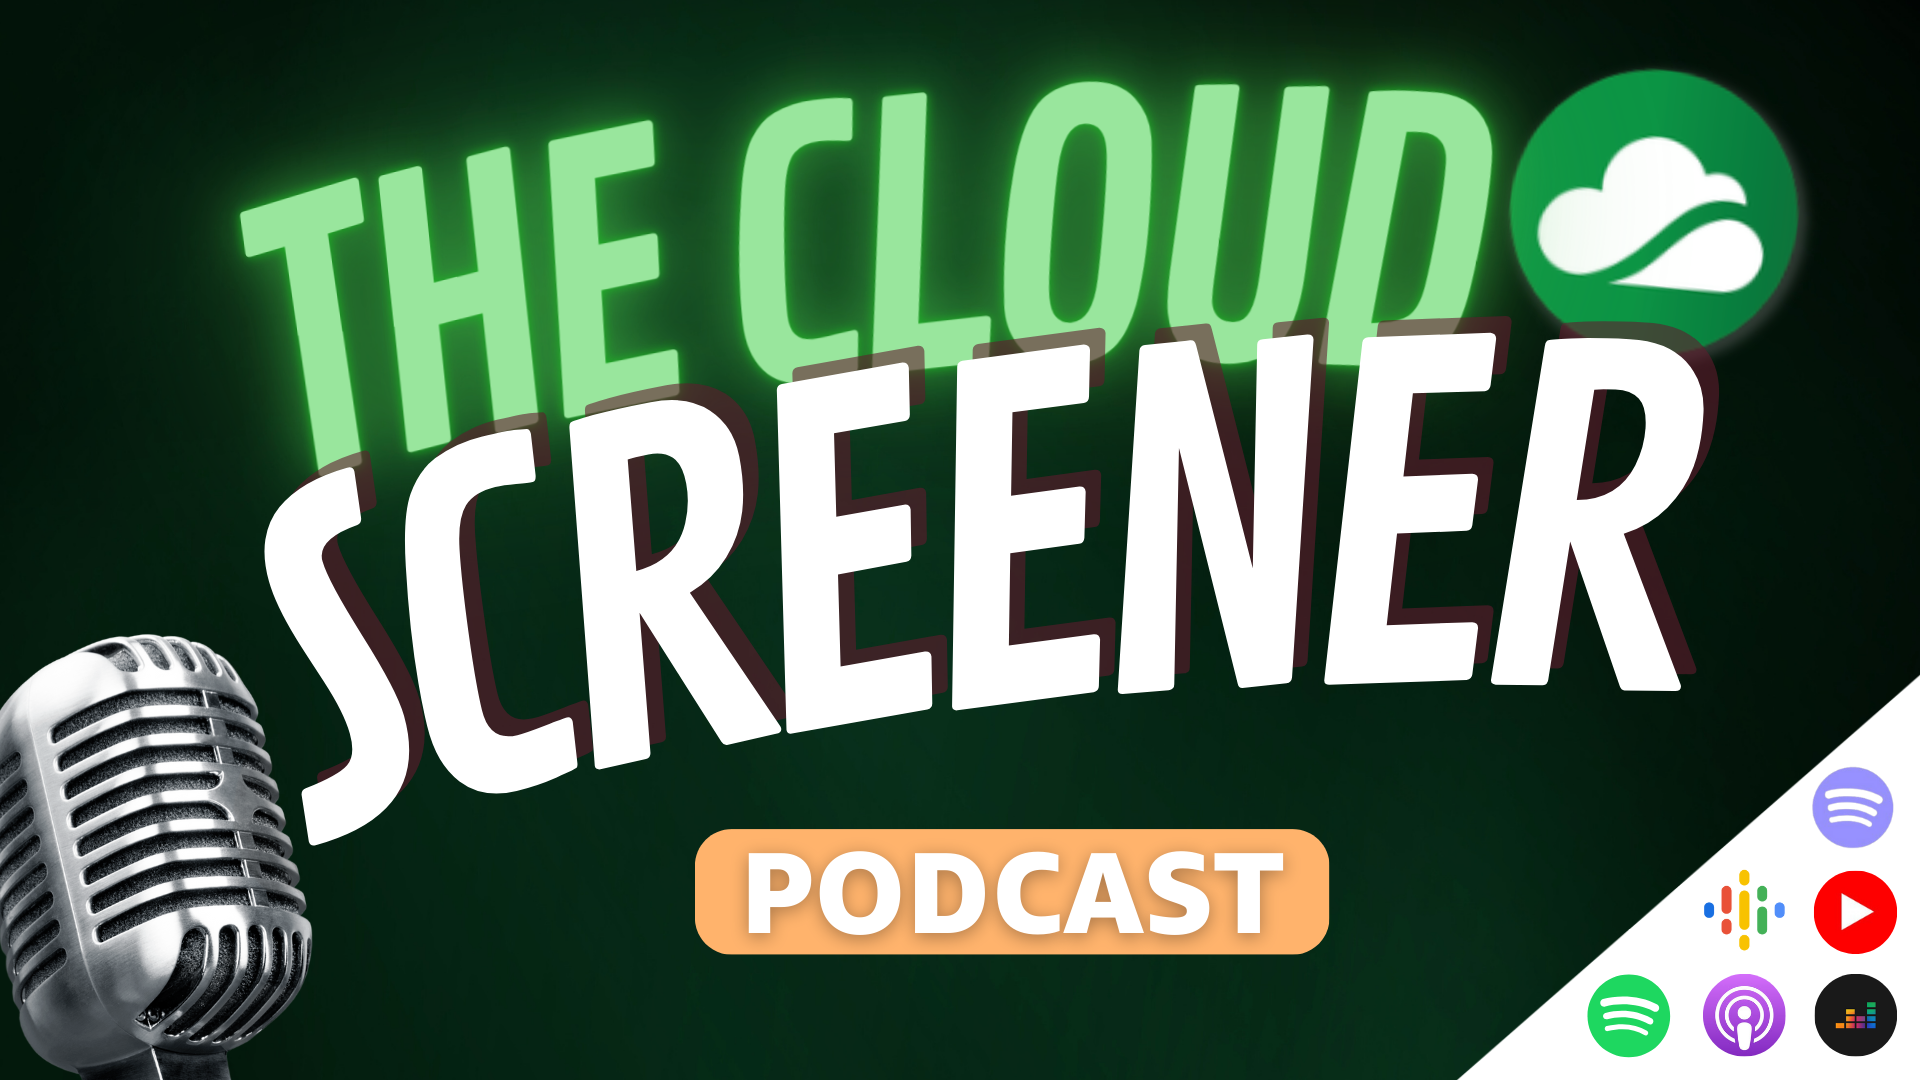 Cloud Mercato : YouTube and podcast with The Cloud Screener